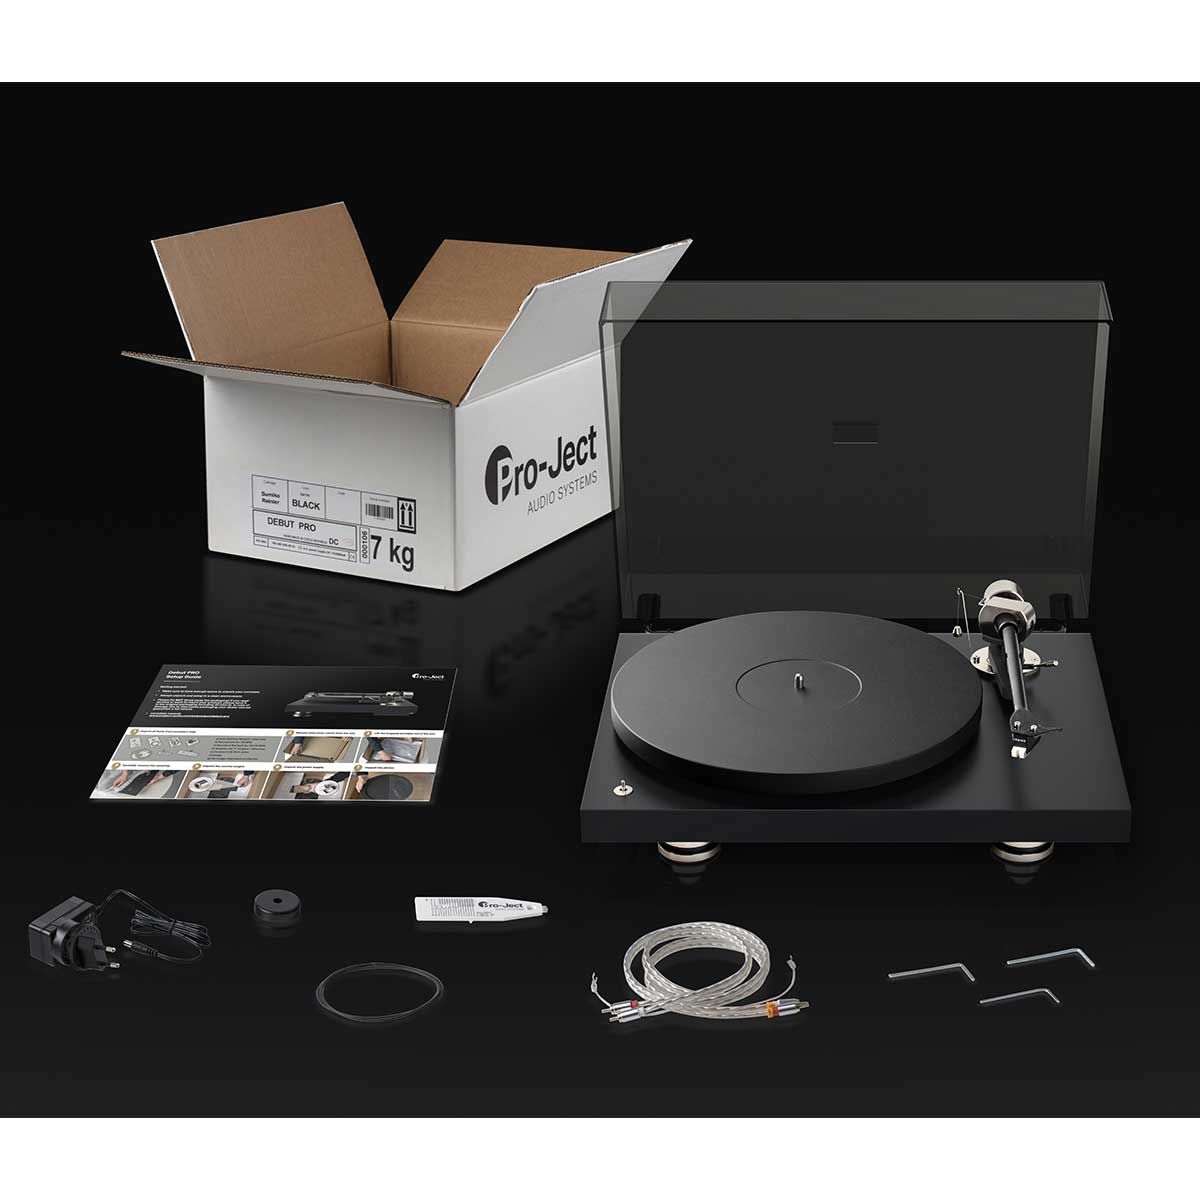 Pro-Ject Debut PRO Turntable, Satin Black, all accessories and included components